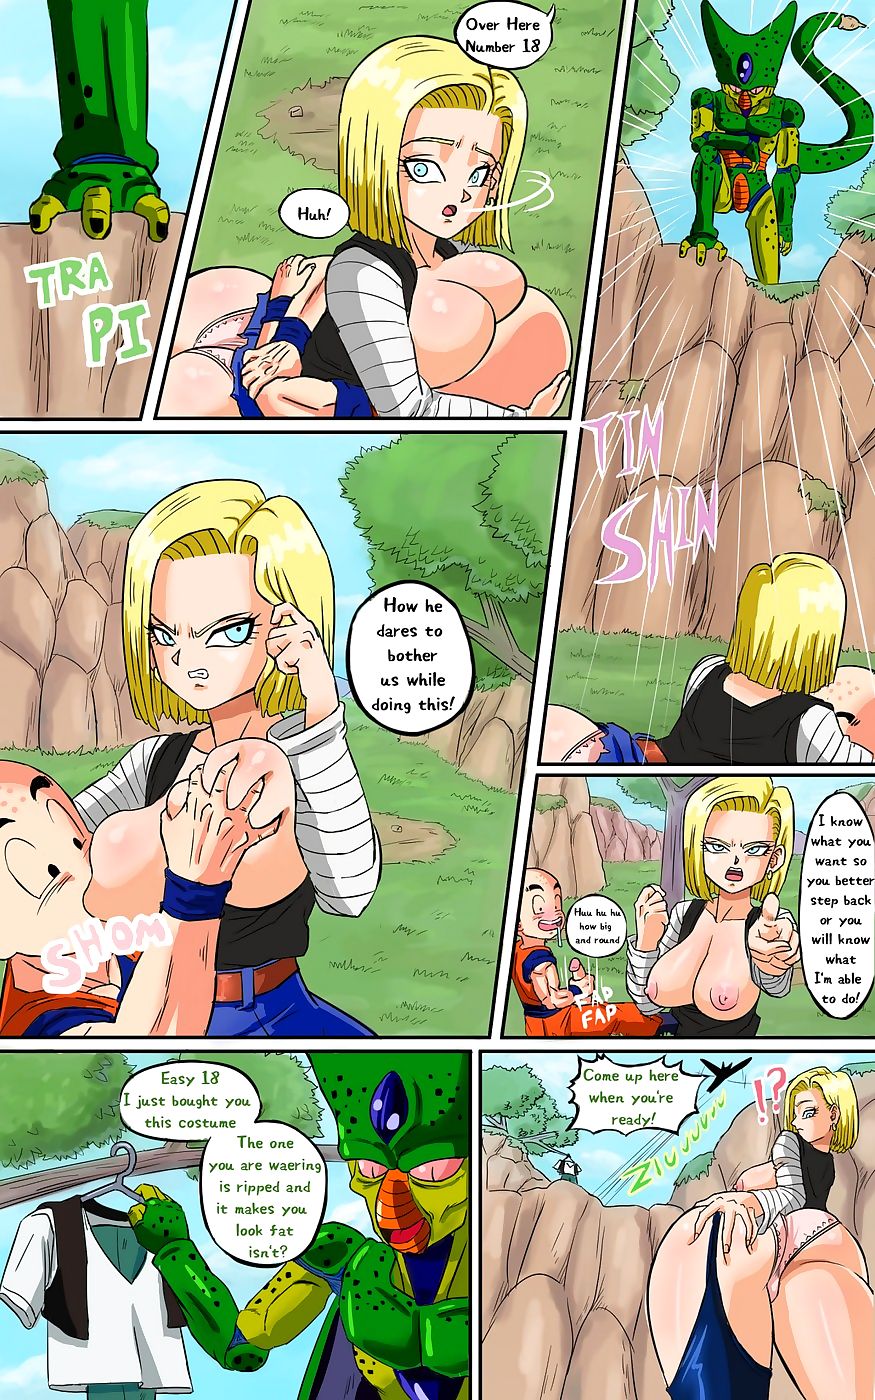 Dragon Ball Z- Android 18 meets Krillin-